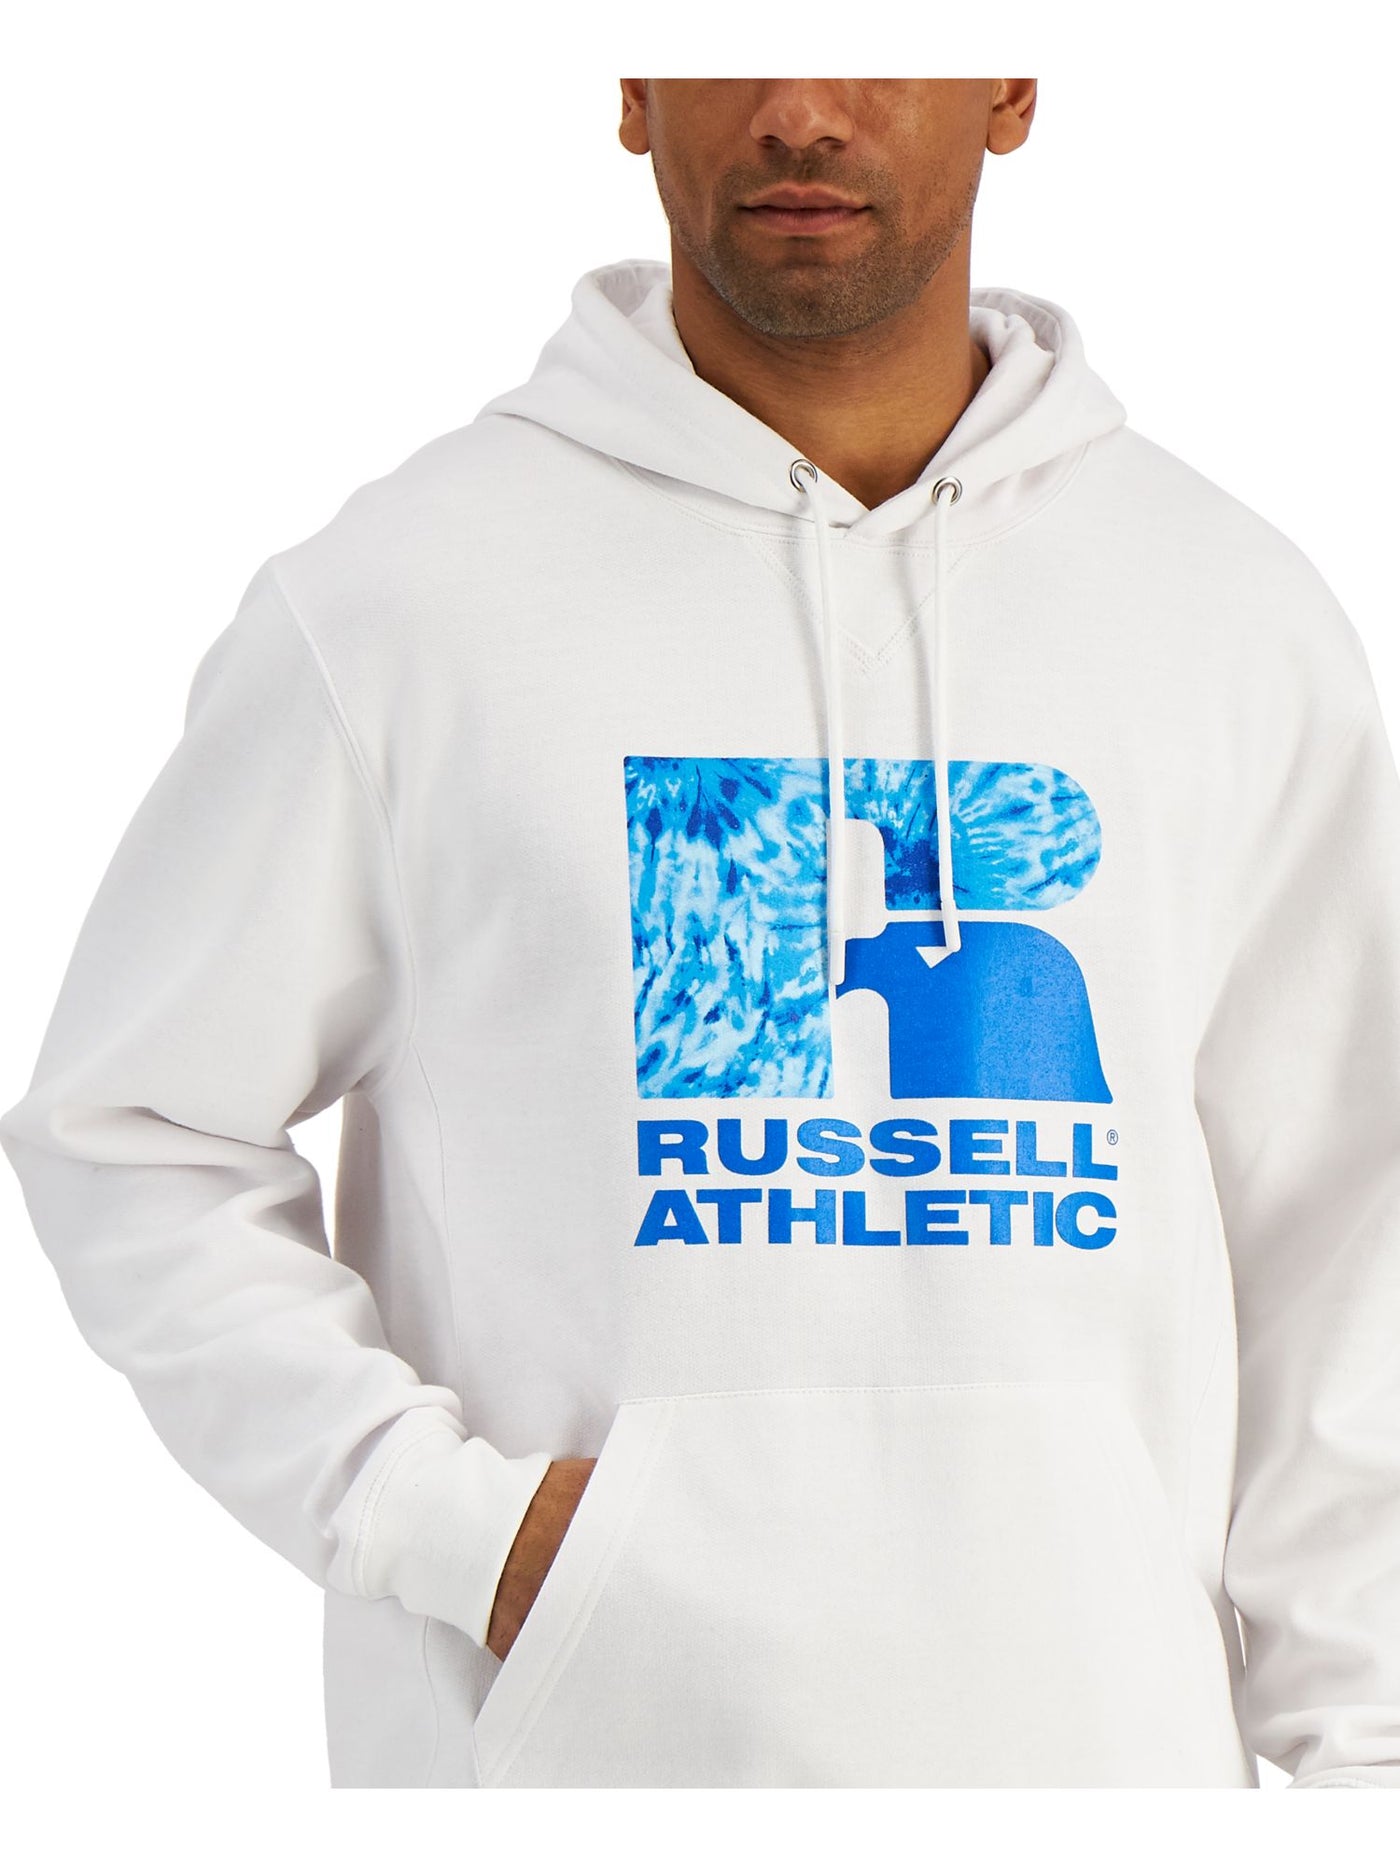 RUSSELL ATHLETIC Mens Santiago White Graphic Draw String Hoodie M